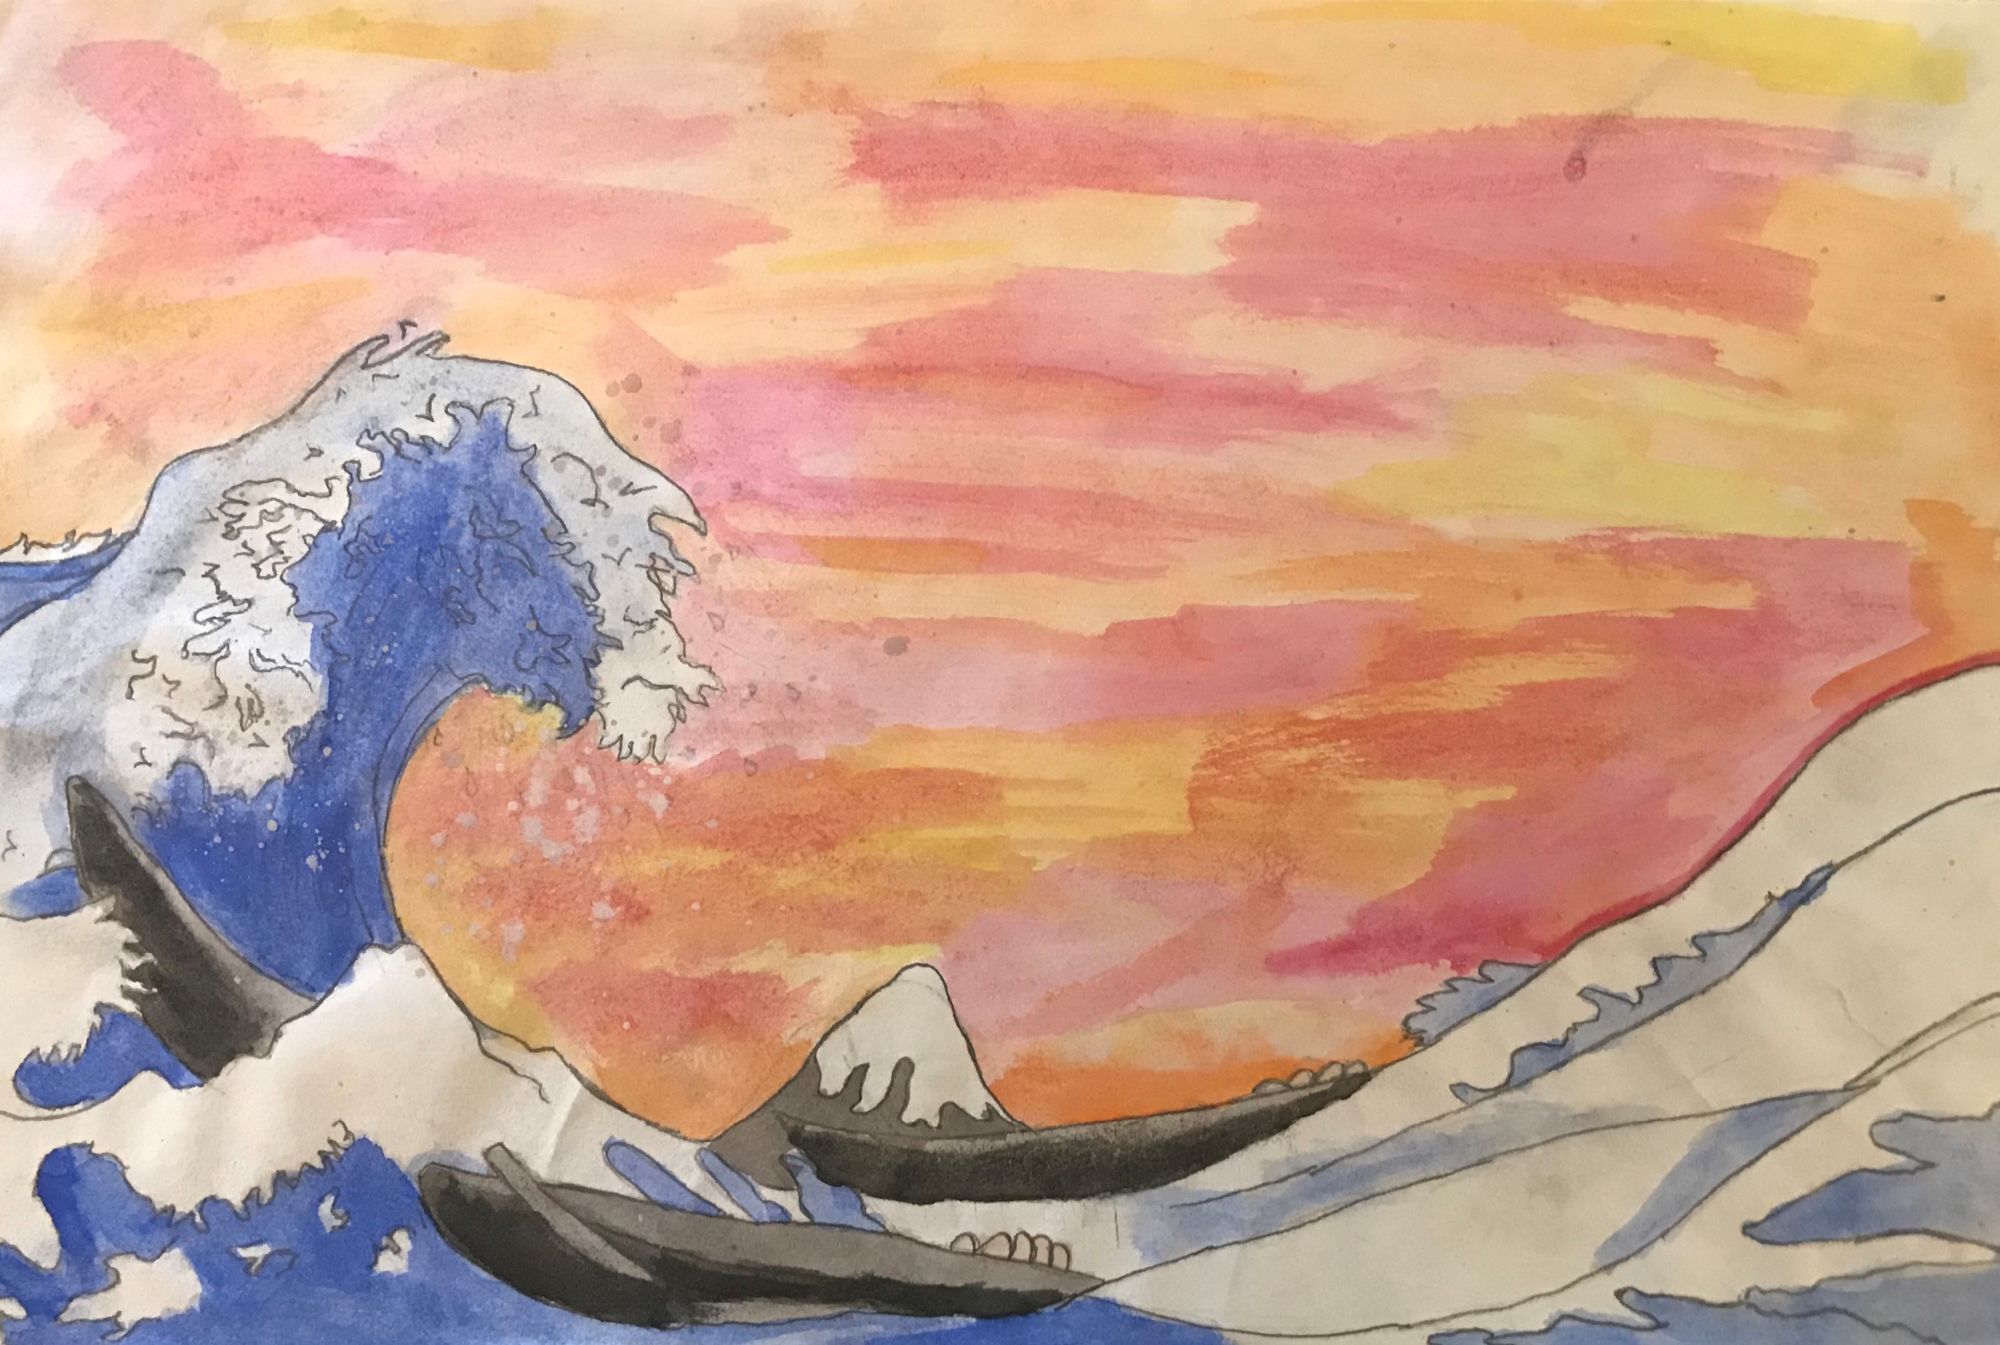 Student artwork - The Great Wave